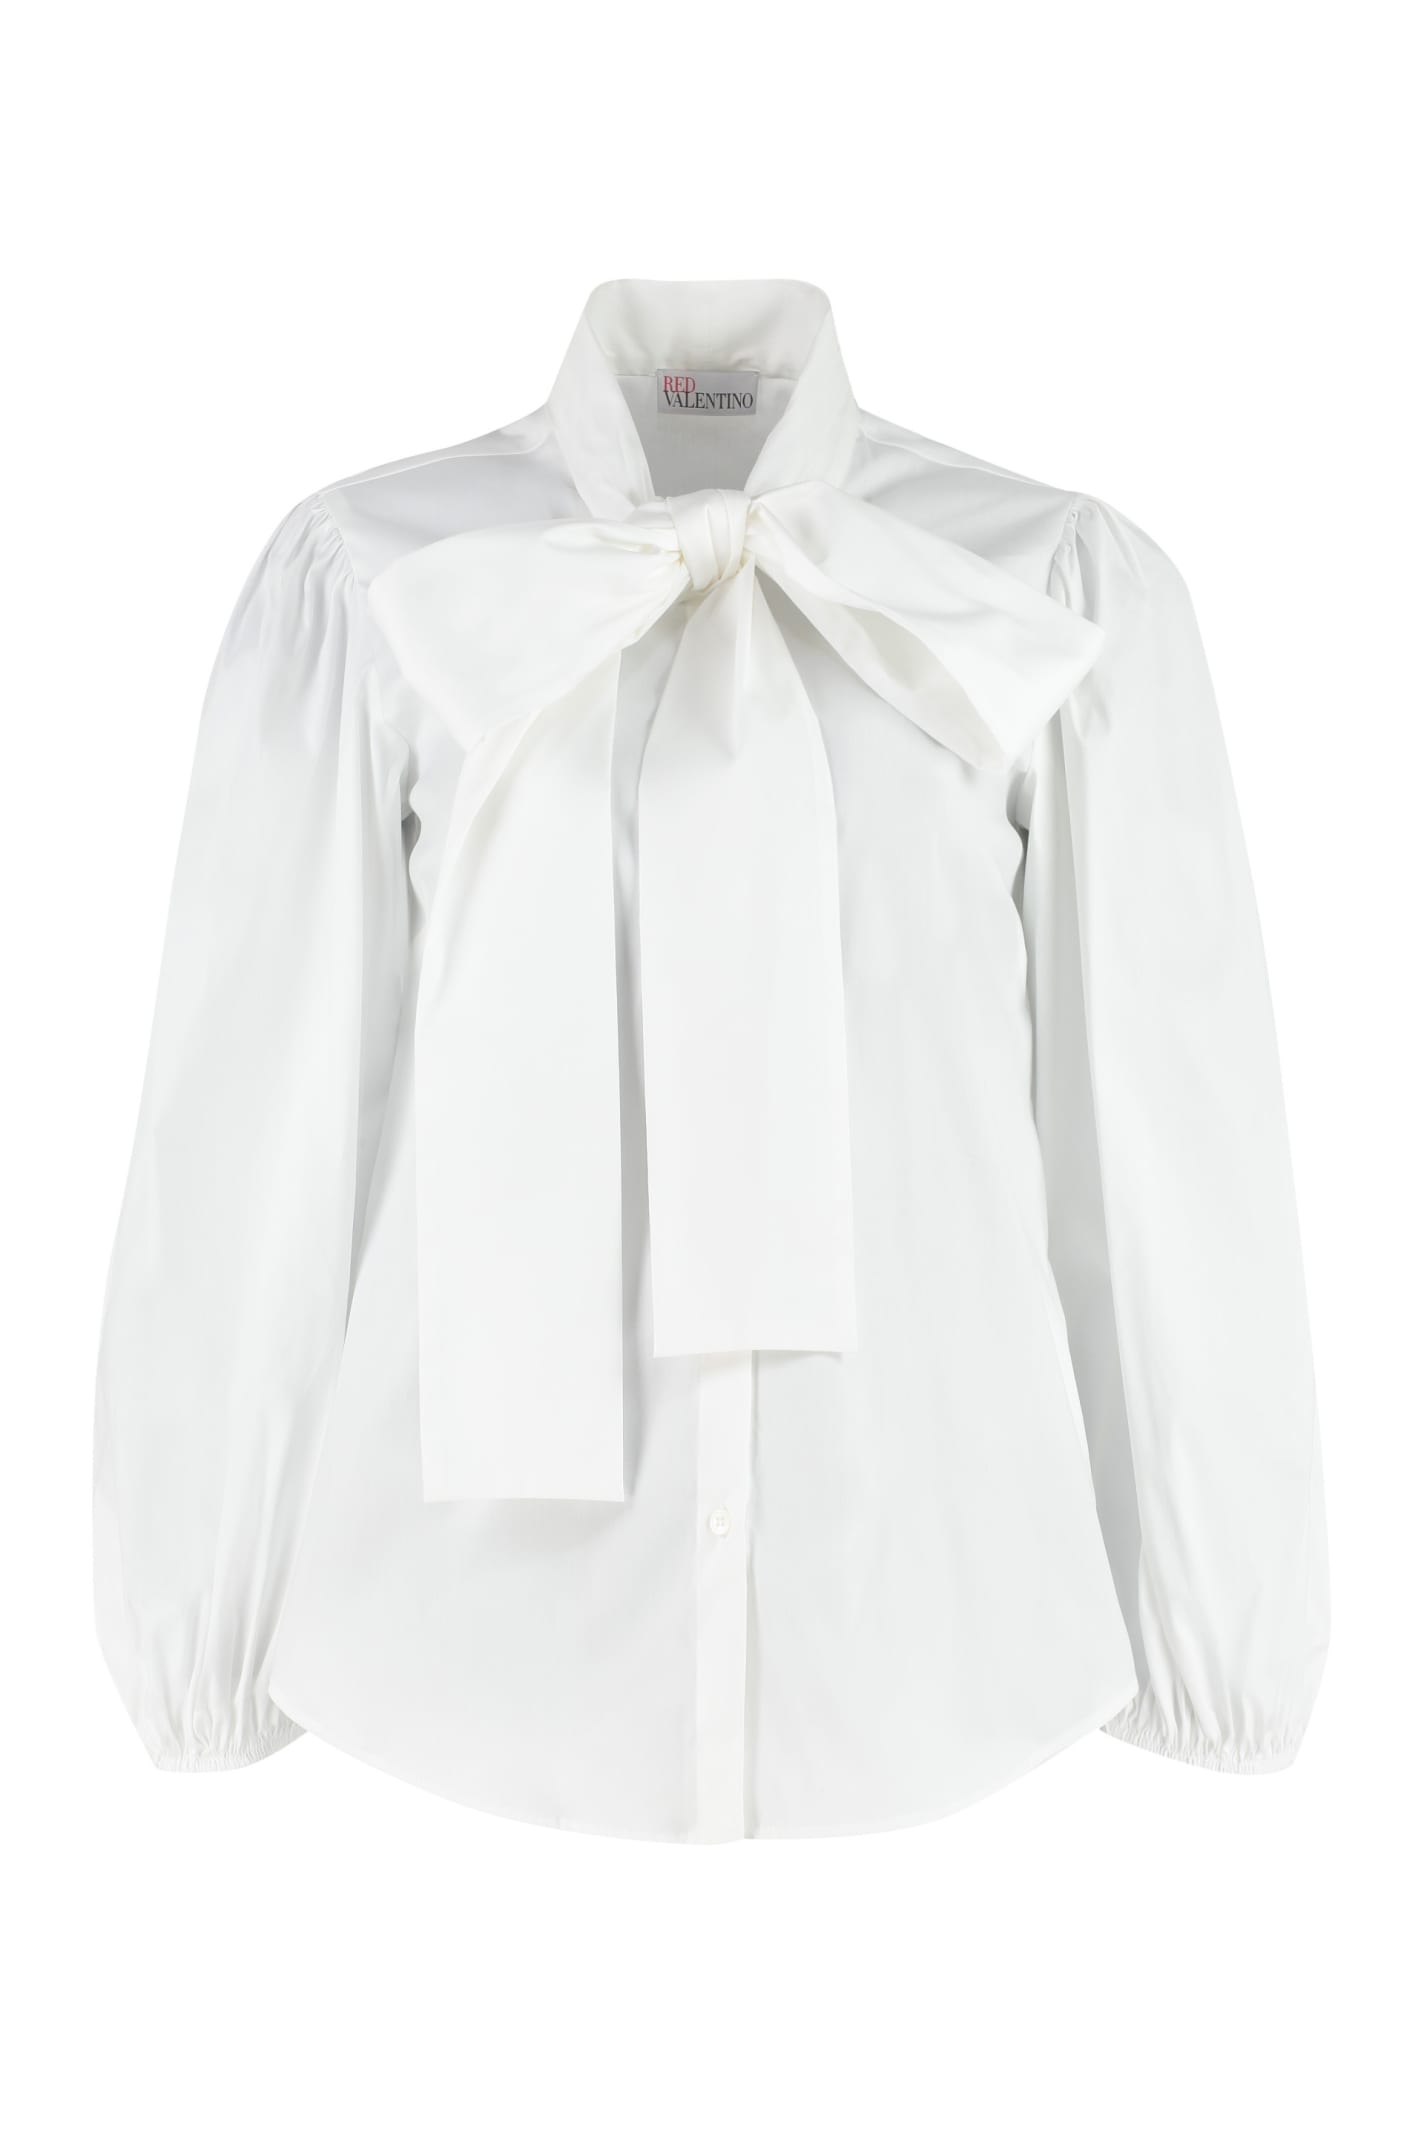 RED Valentino Pussy-bow Collar Cotton Shirt